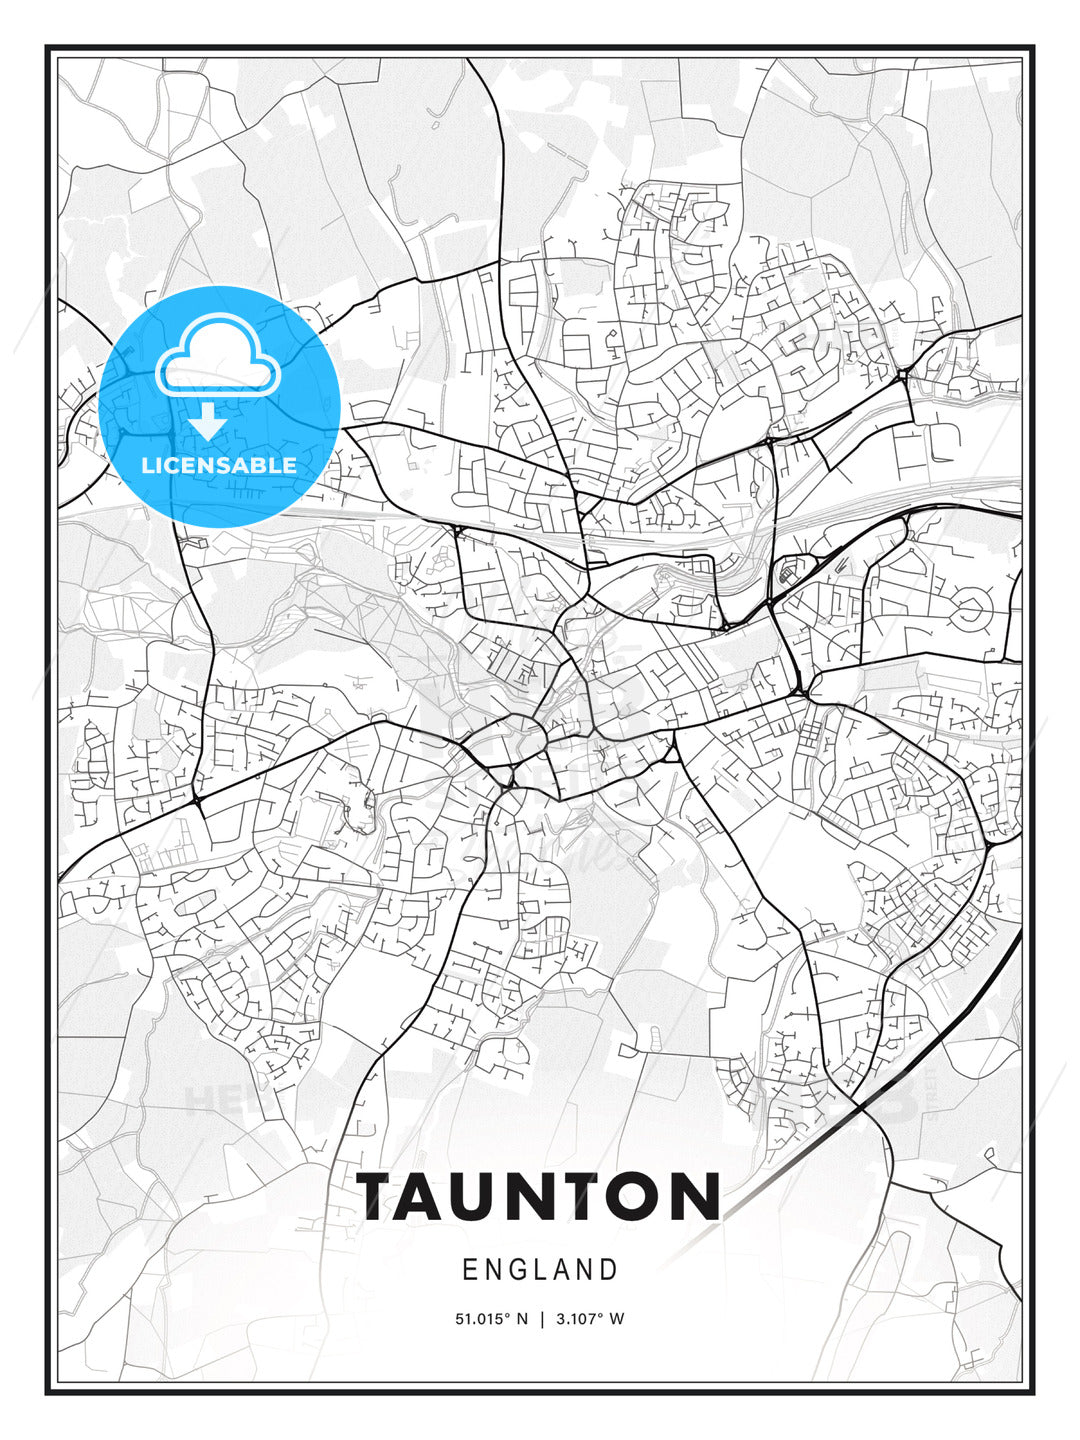 Taunton, England, Modern Print Template in Various Formats - HEBSTREITS Sketches